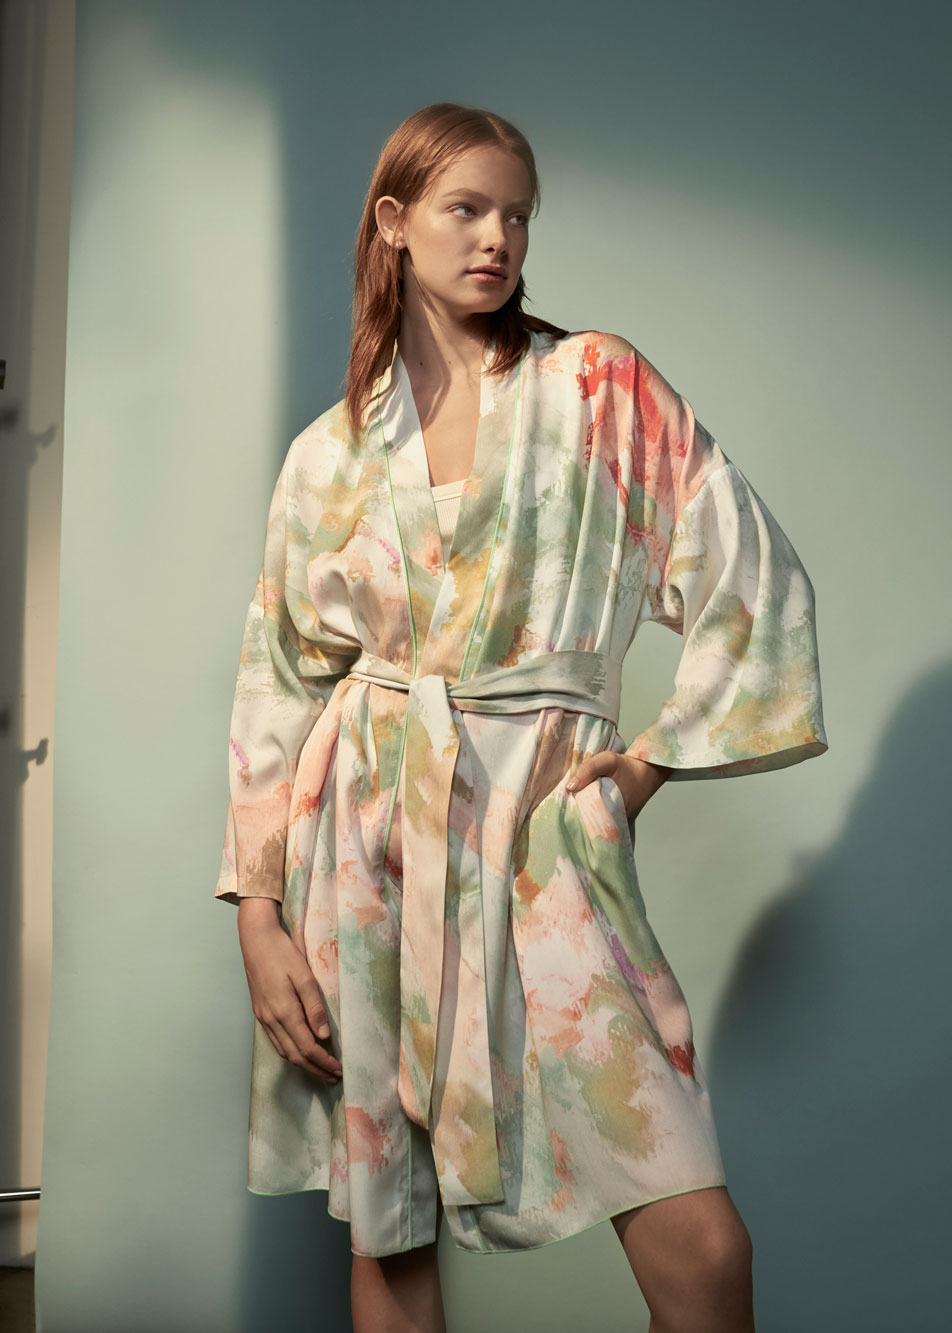 A young red headed woman standing in front of a pale green backdrop, wearing a Dovelake bath robe.